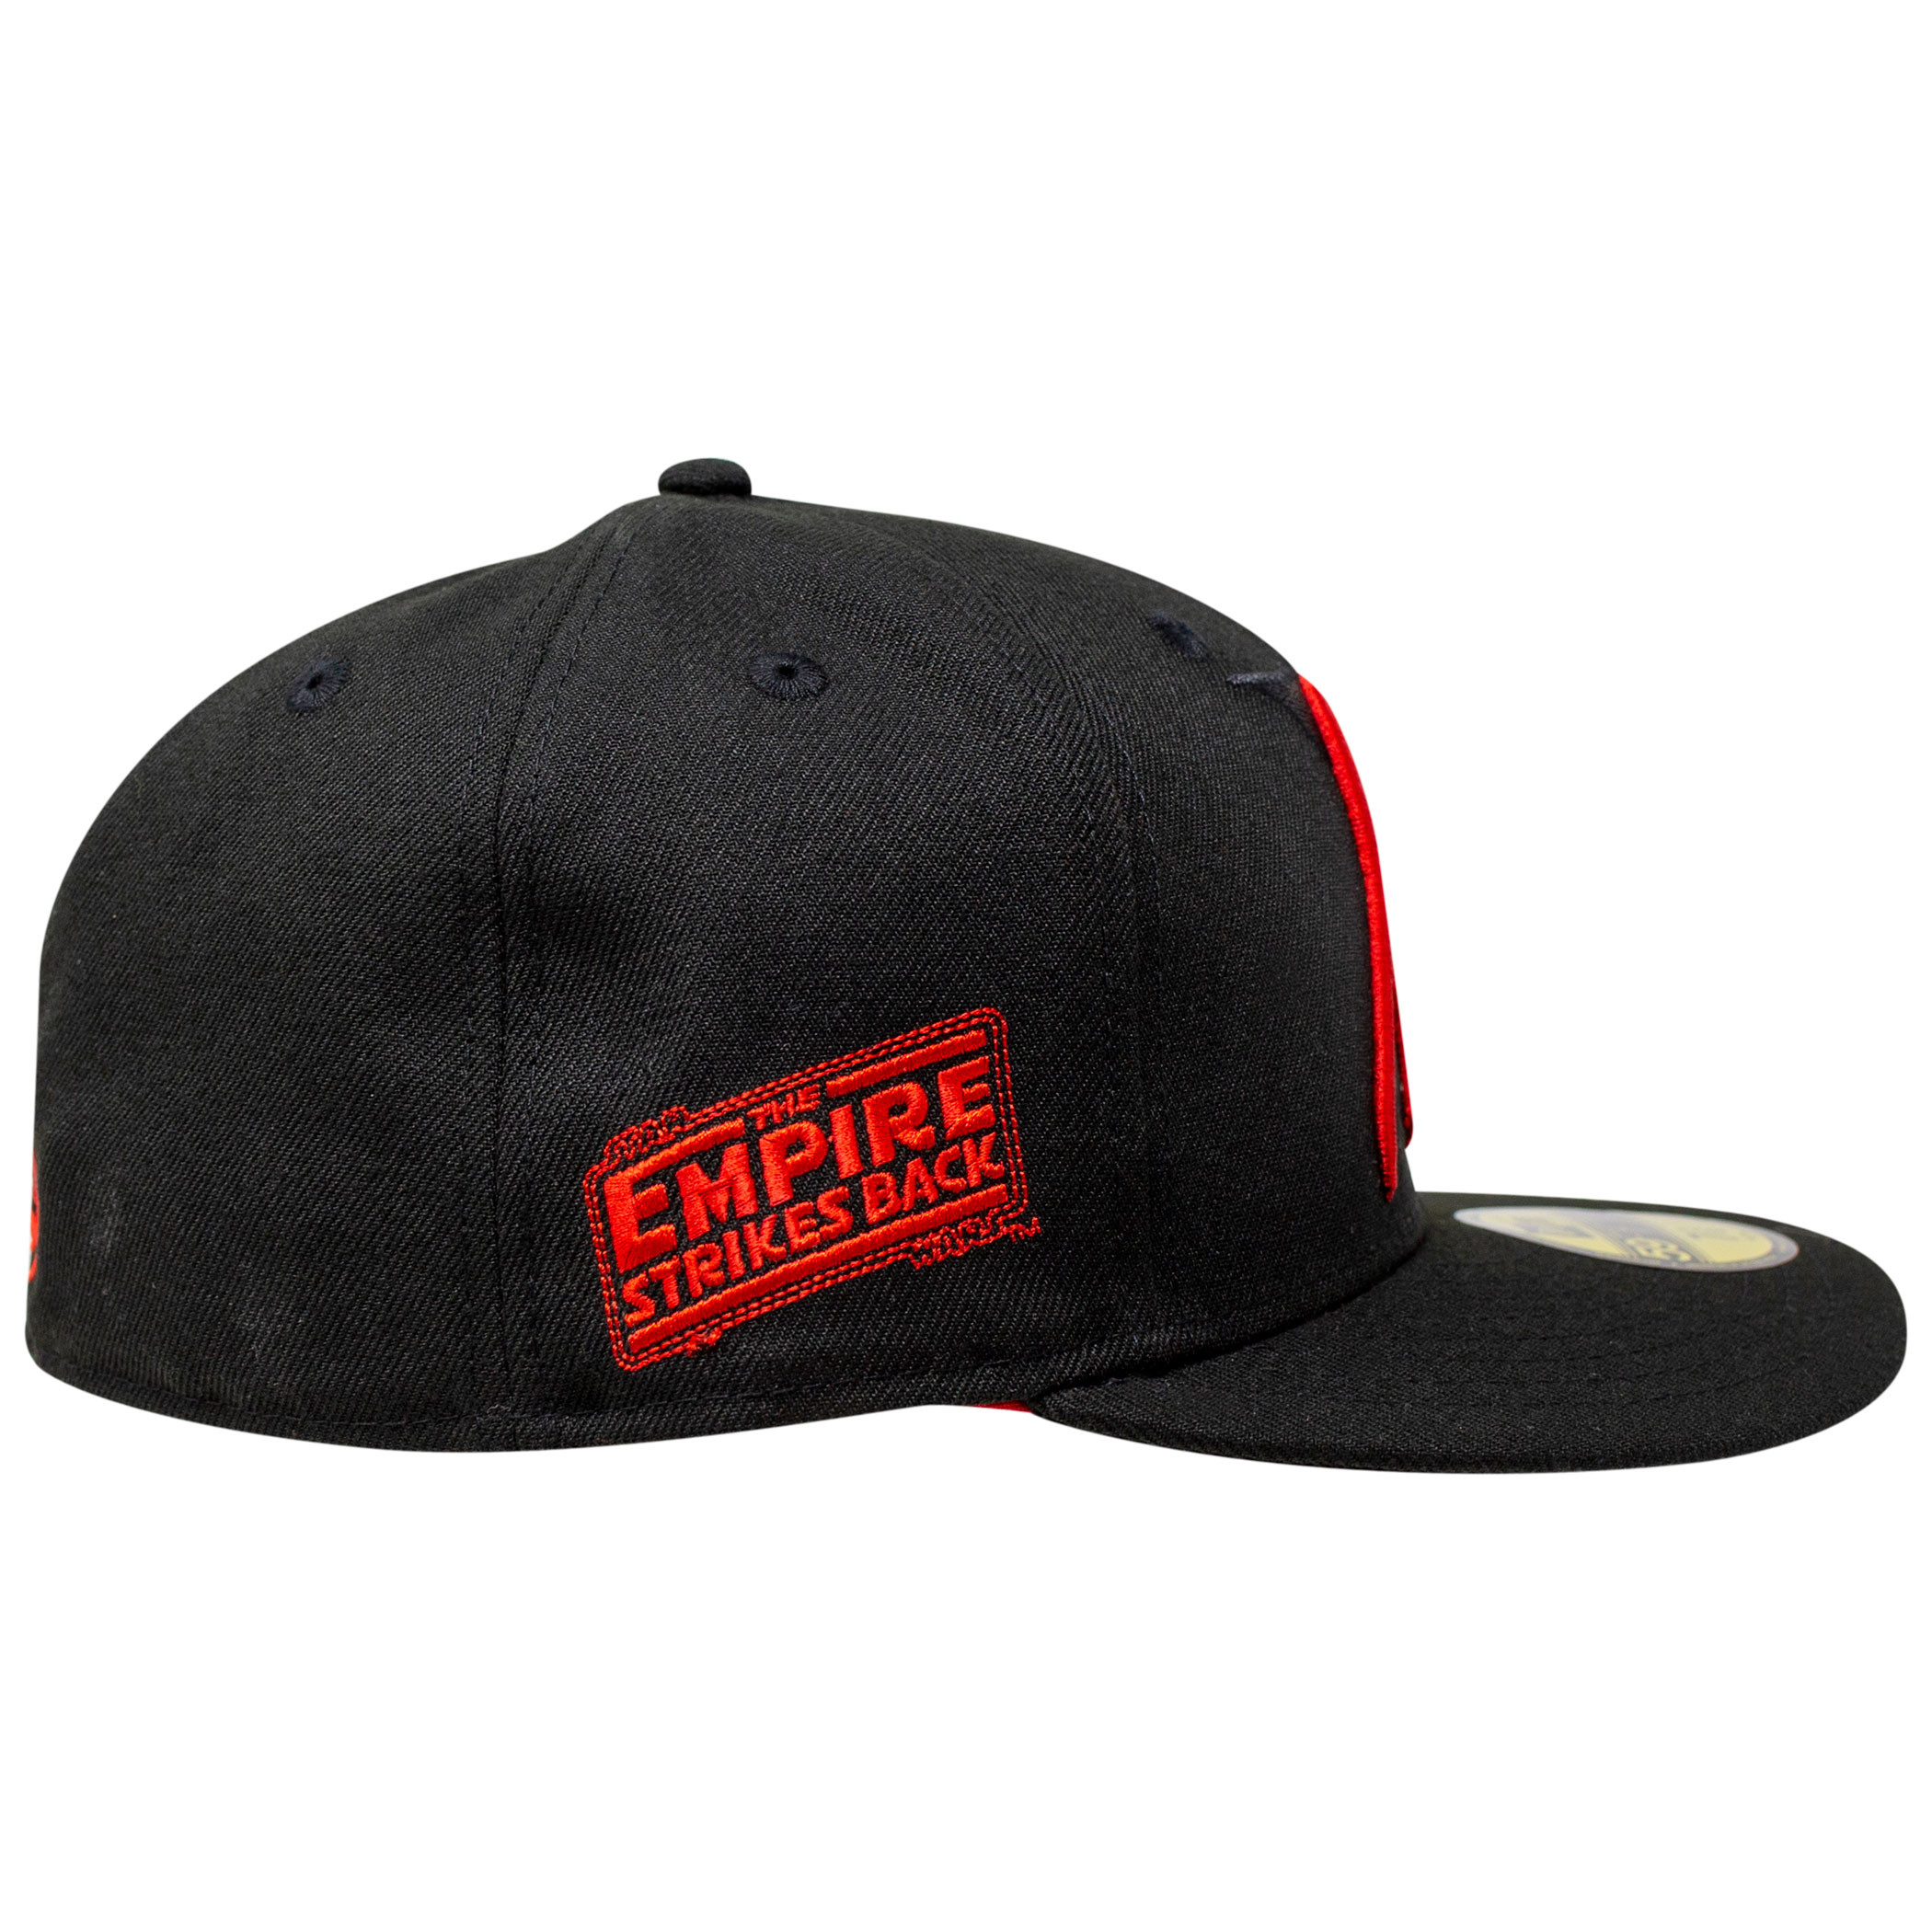 Star Wars Empire Strikes Back 40th Anniversary Outline New Era 59Fifty Hat